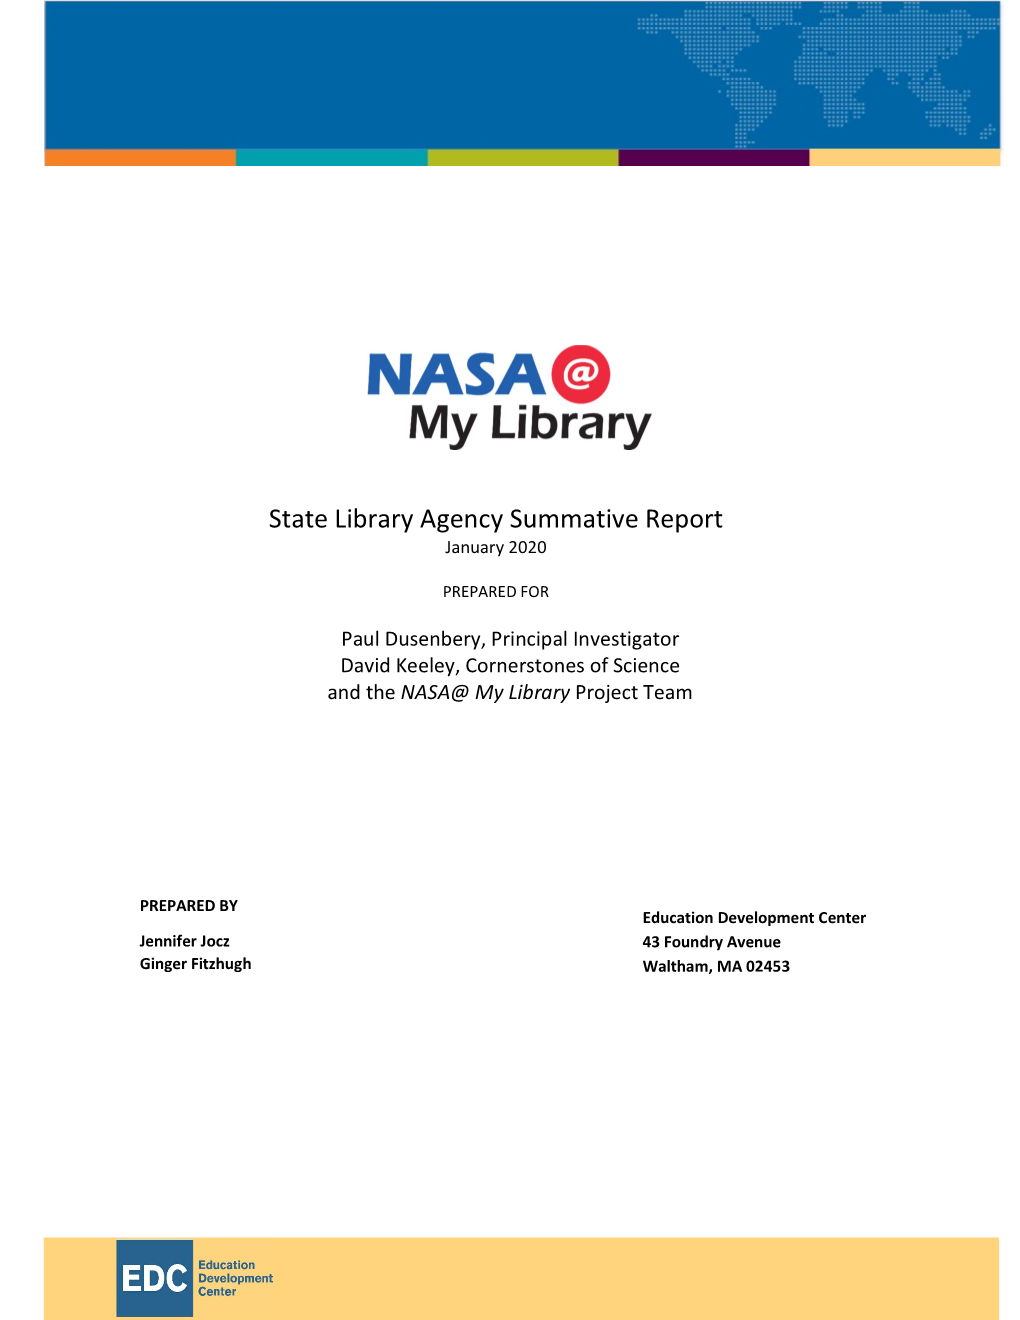 State Library Agency Summative Report January 2020